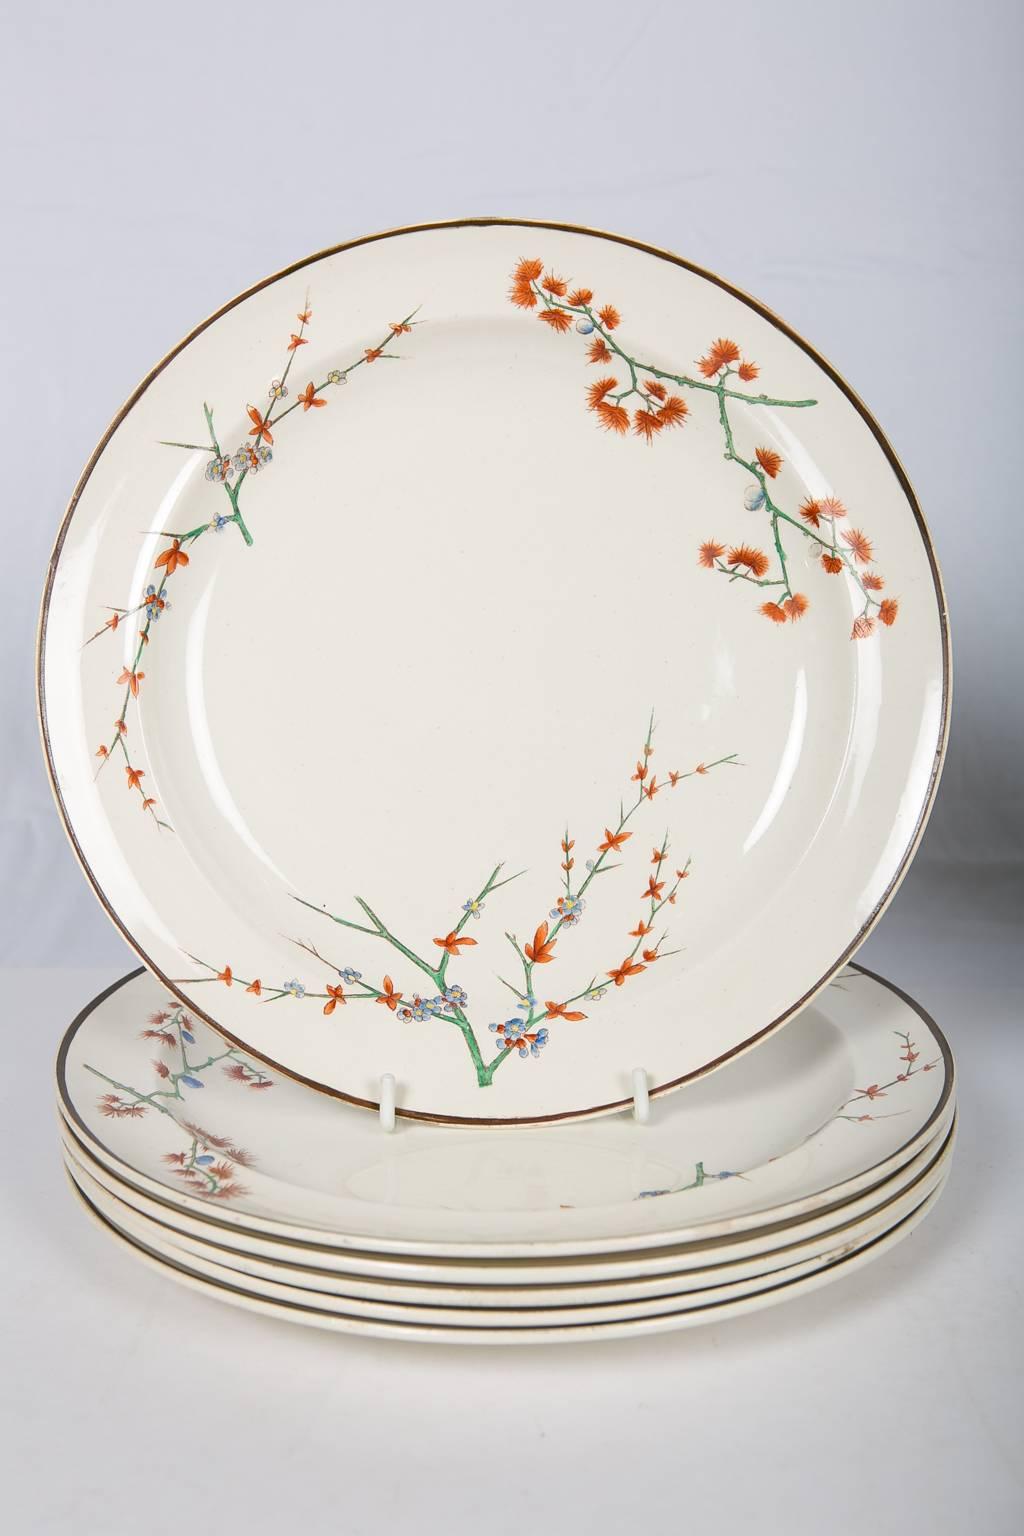 We are pleased to offer this set of 26 Wedgwood creamware dinner plates with a thistle design.
These English creamware dinner plates date to the late 19th century, circa 1880. 
They have a lovely, simple design decorated with flowering thistle